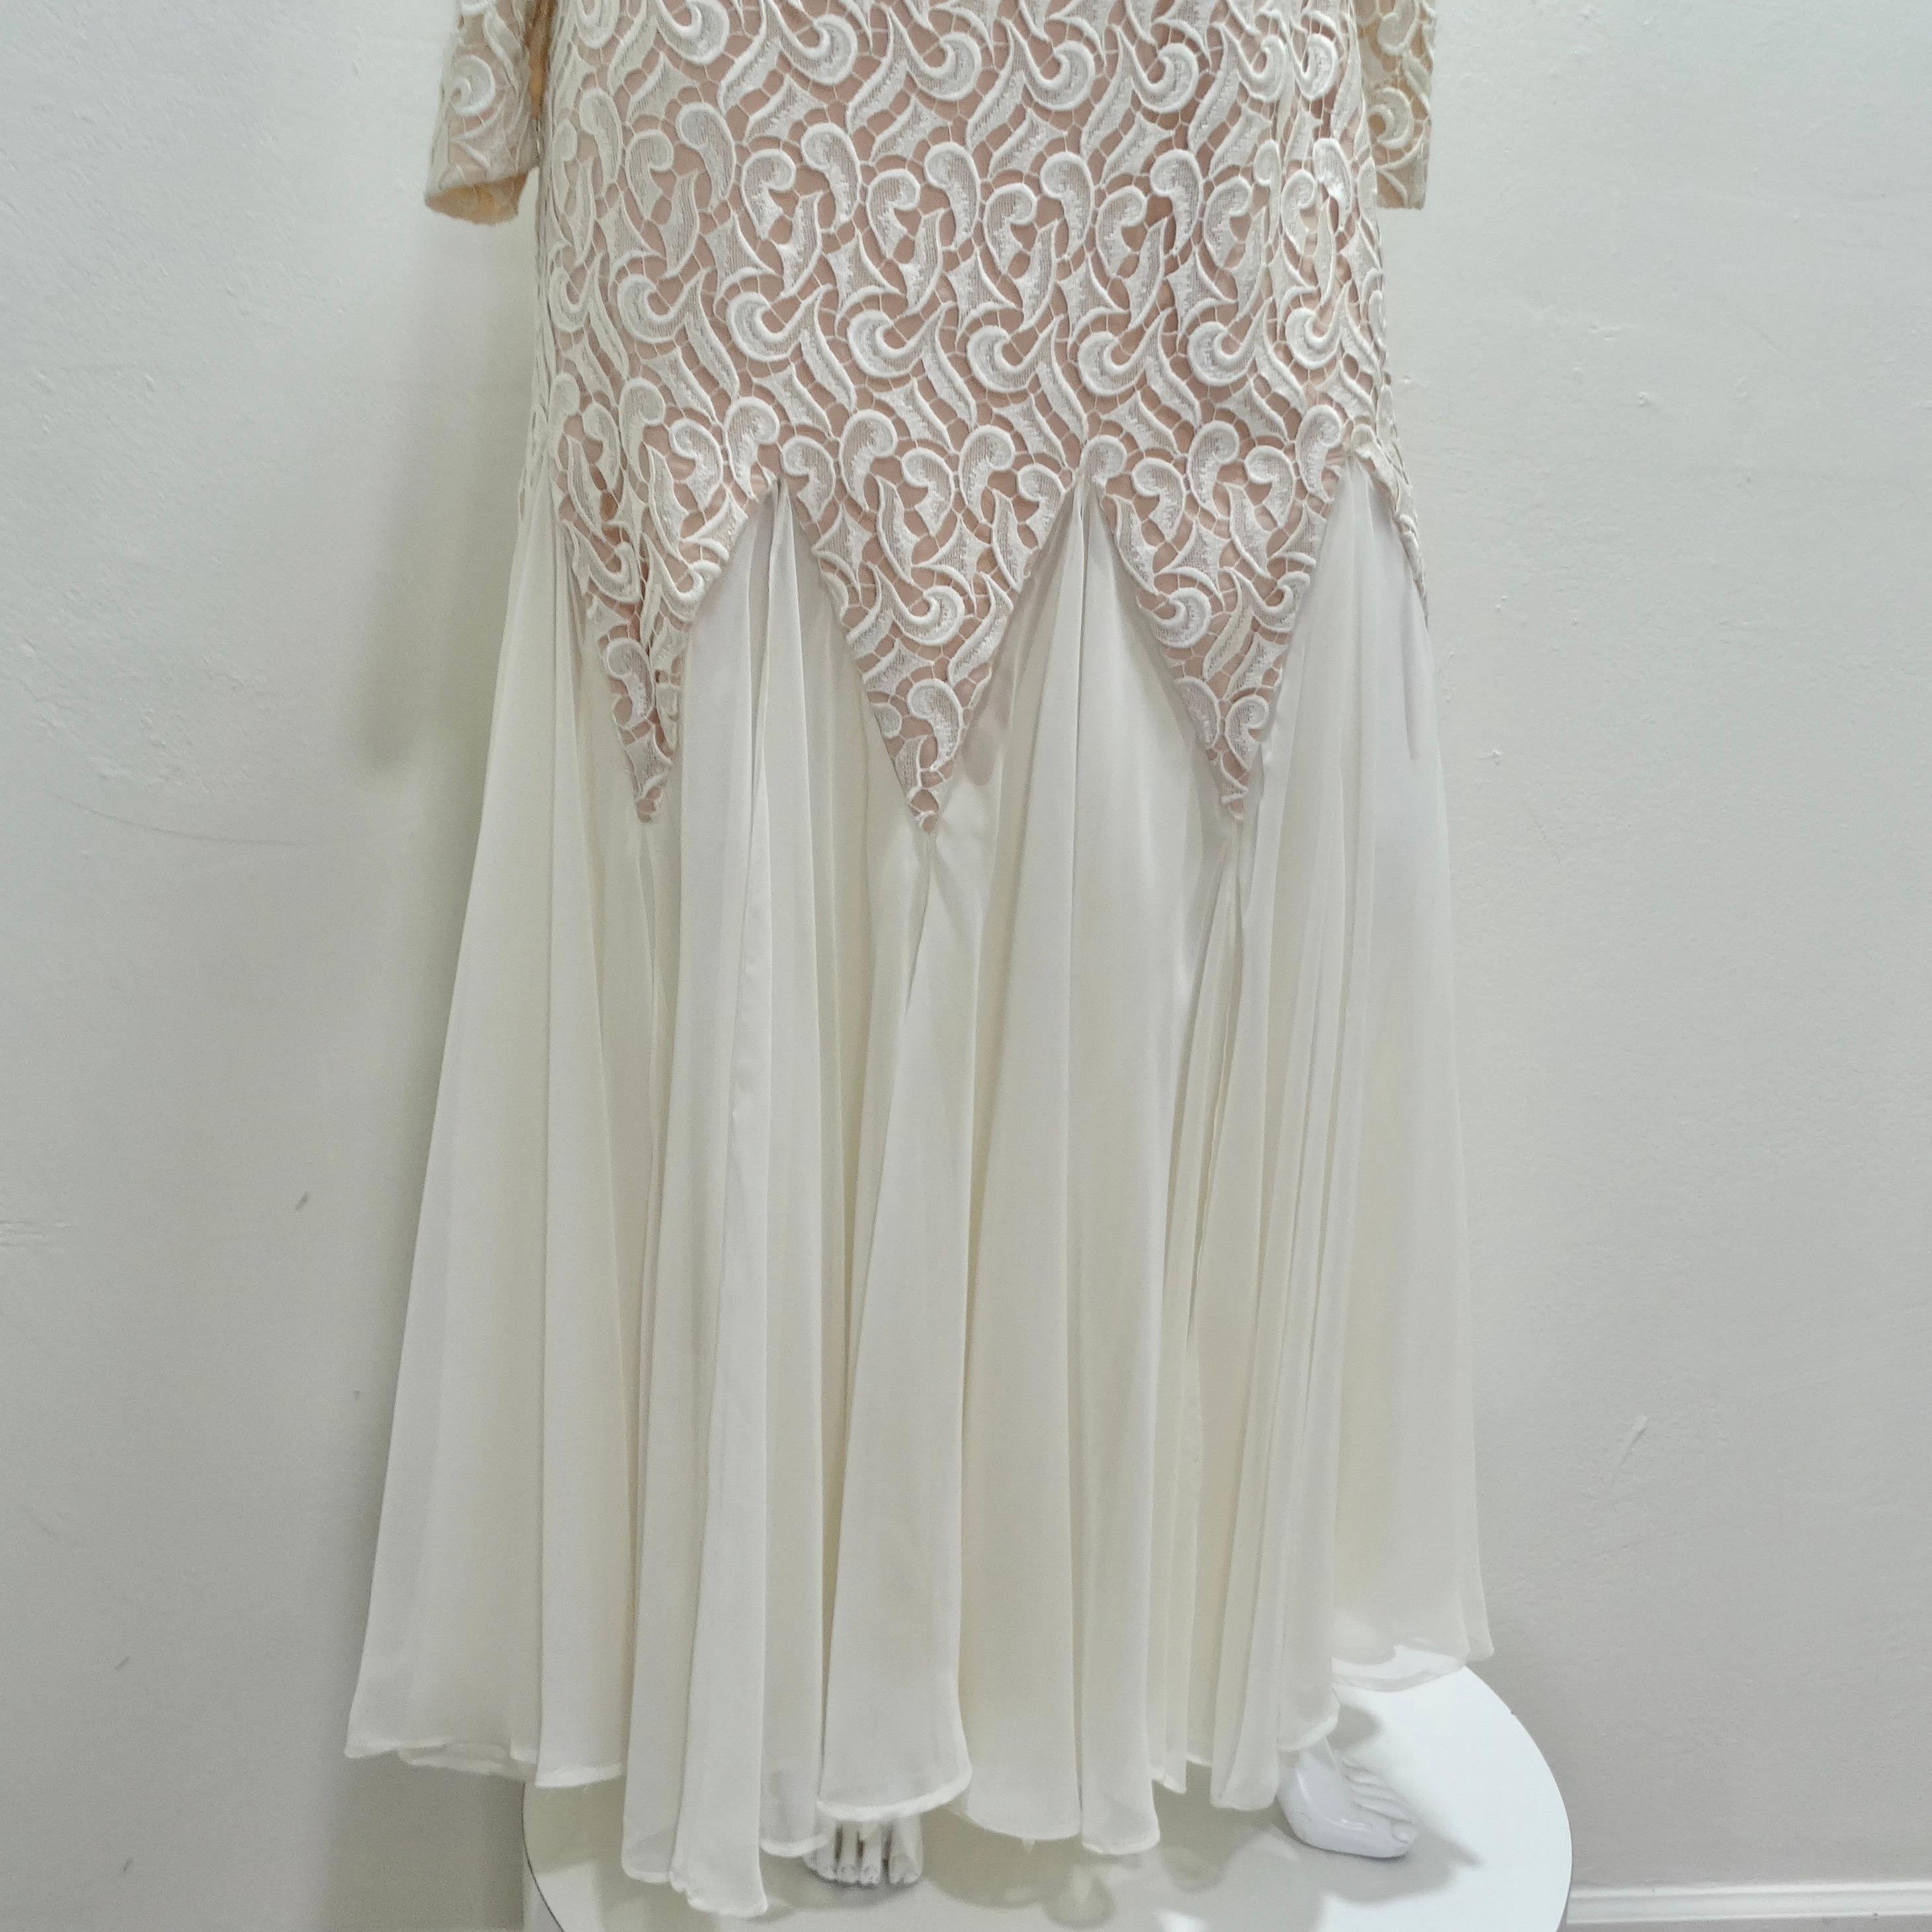 I Magnin Travilla 1980s White Lace Mermaid Bridal Dress In Good Condition For Sale In Scottsdale, AZ